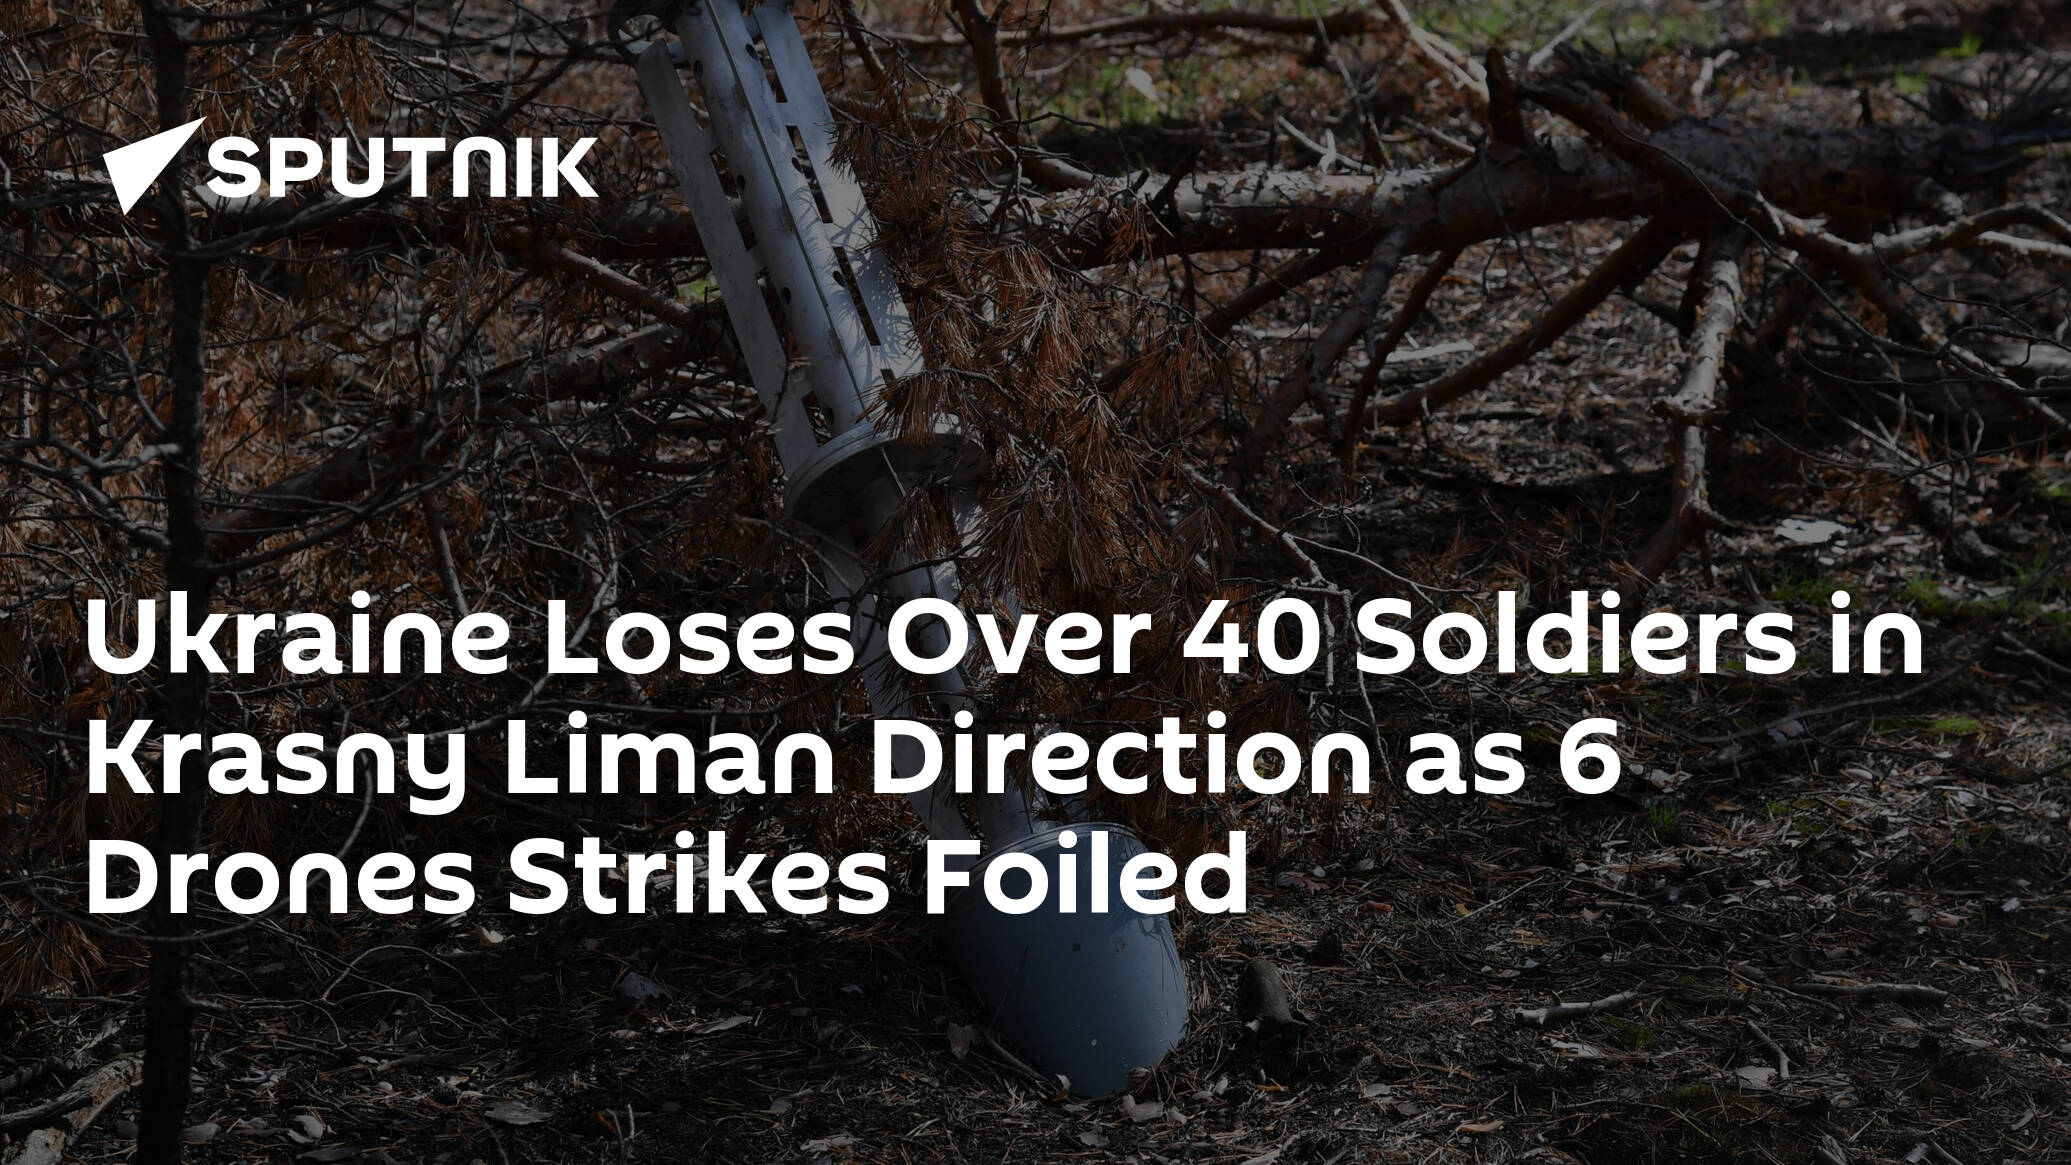 Ukraine Loses Over 40 Soldiers in Krasny Liman Direction as 6 Drones Strikes Foiled